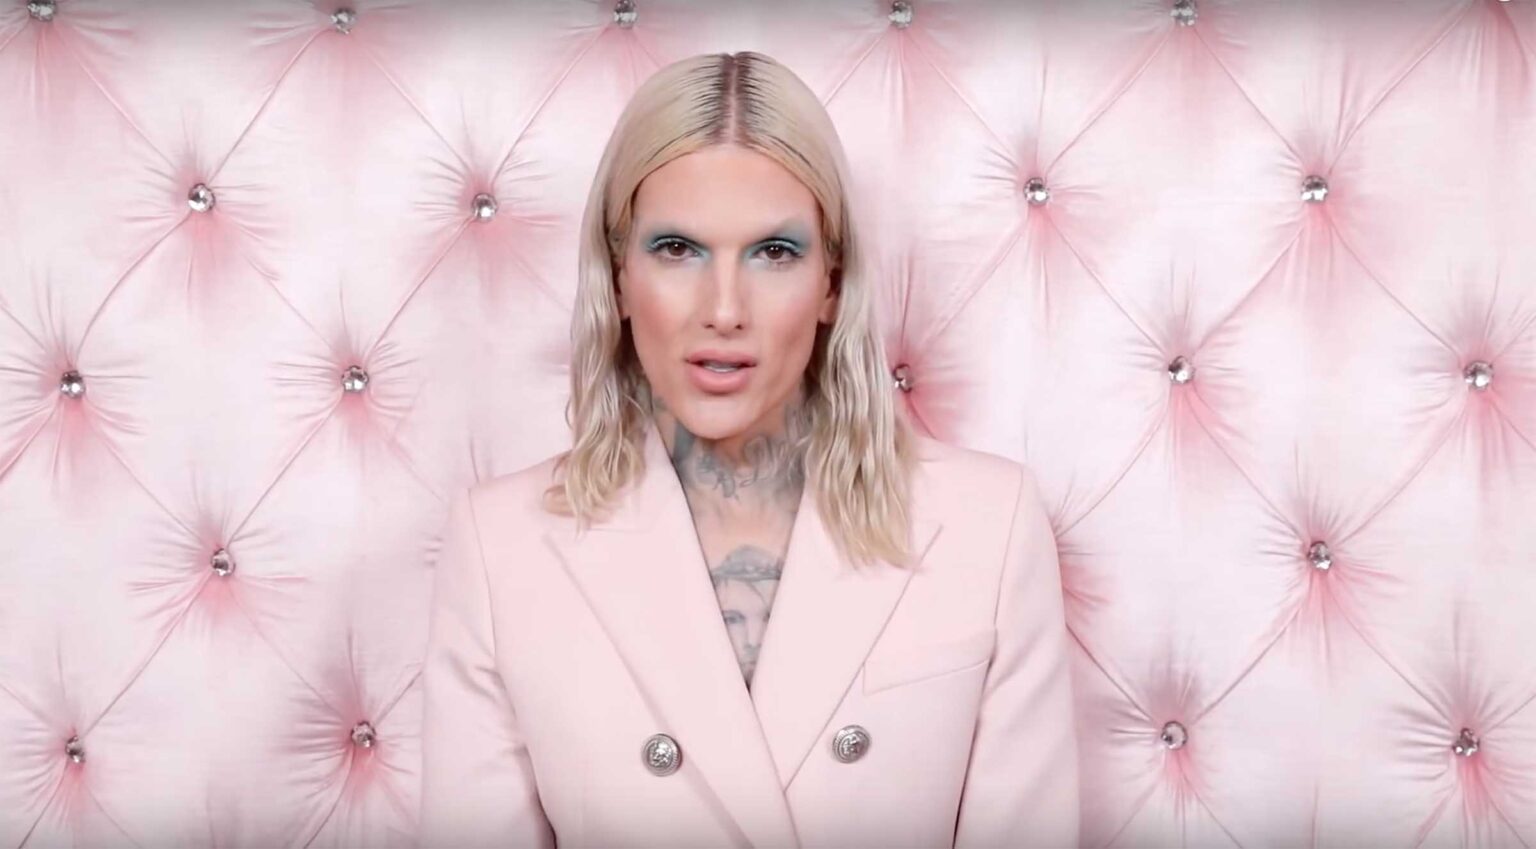 Jeffree Star claimed he was robbed of over two million dollars worth of product in April. But the evidence is now suggesting it was less than $100k.